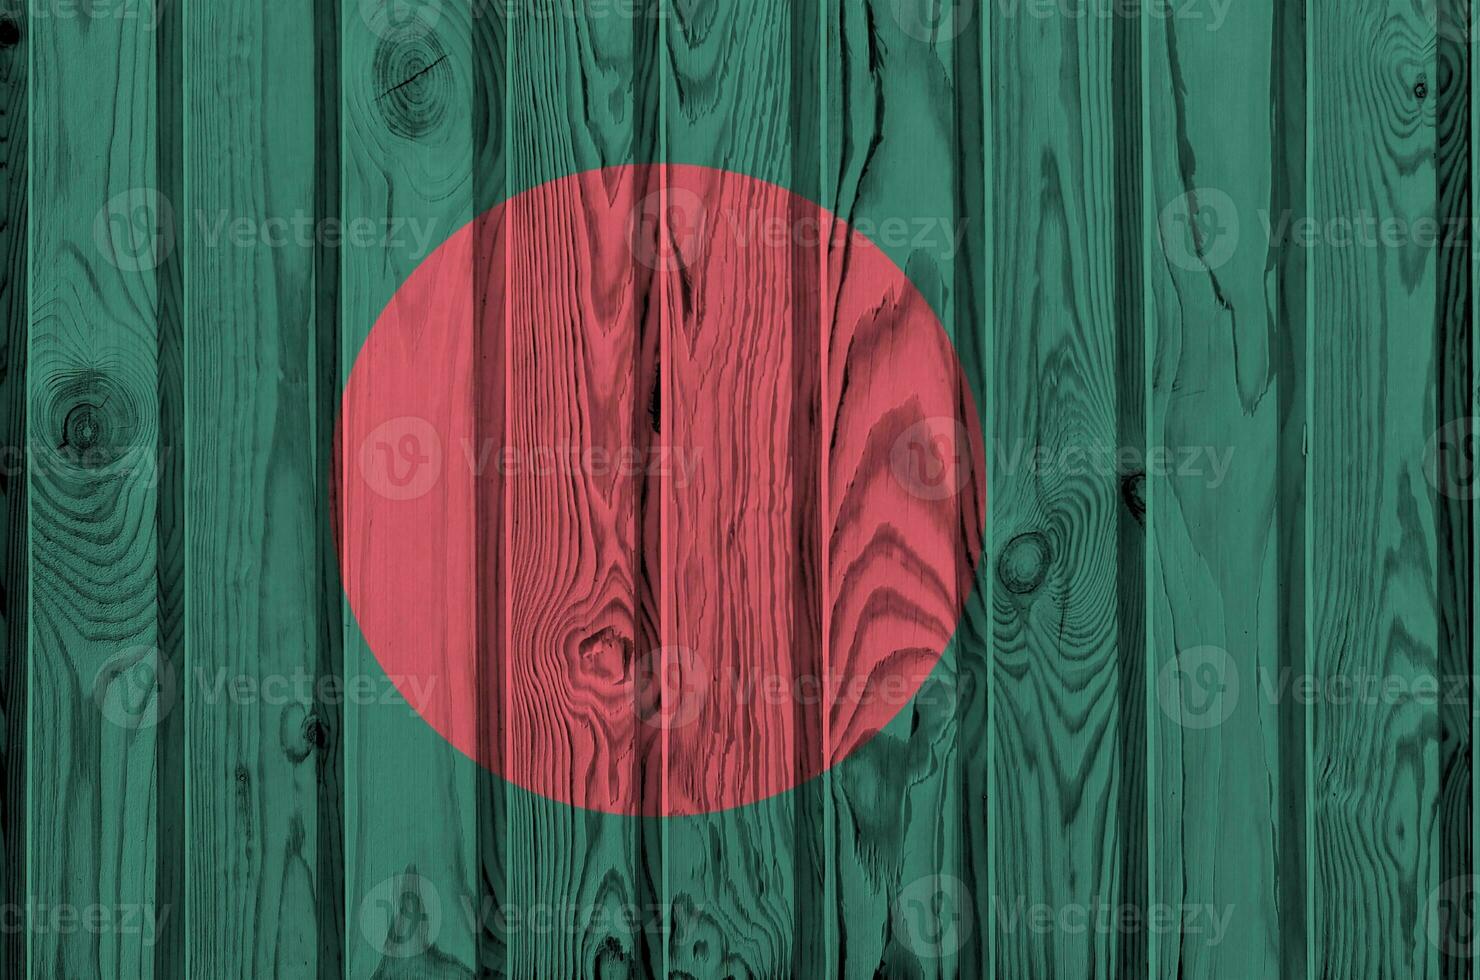 Bangladesh flag depicted in bright paint colors on old wooden wall. Textured banner on rough background photo